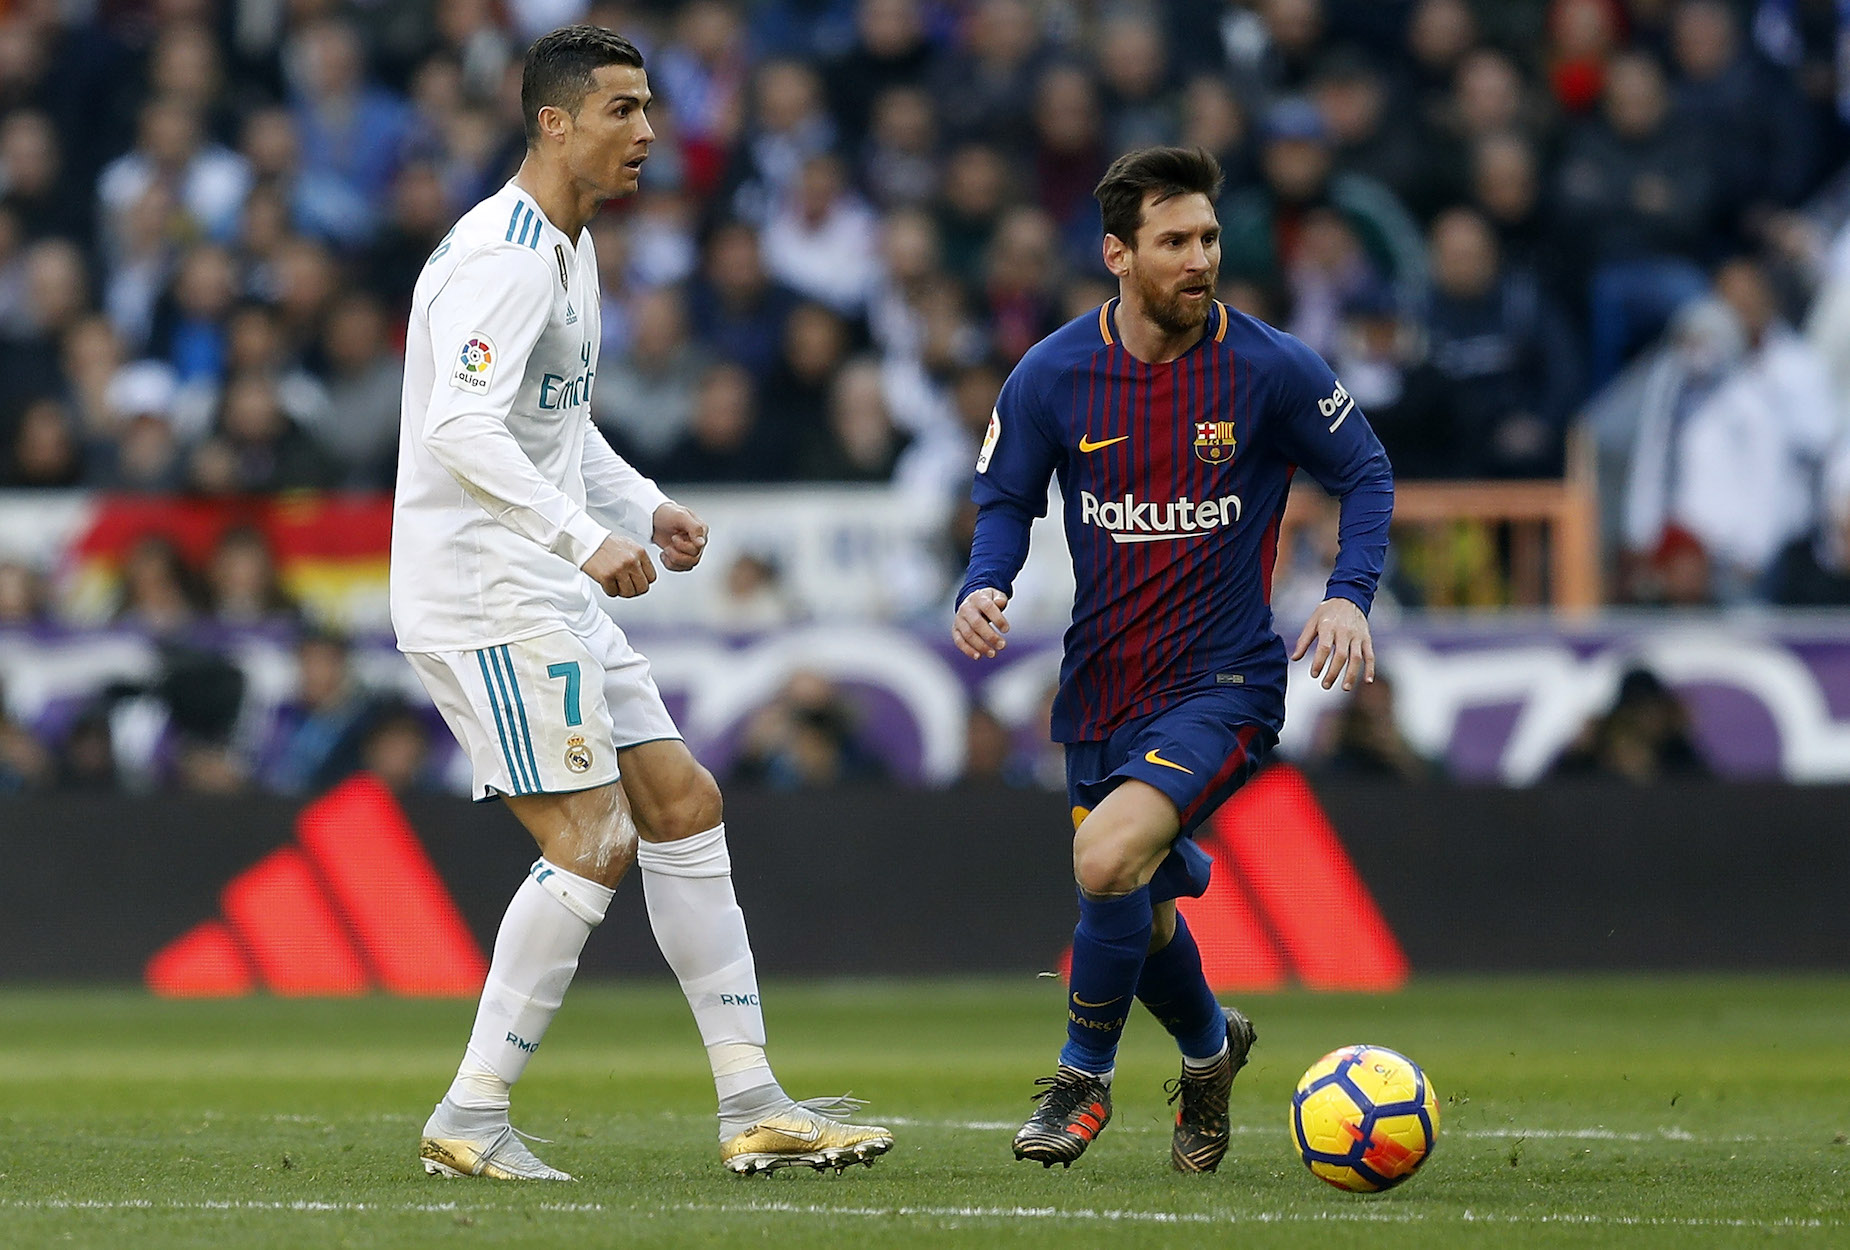 Lionel Messi Just Scored Another Victory in His Rivalry With Cristiano